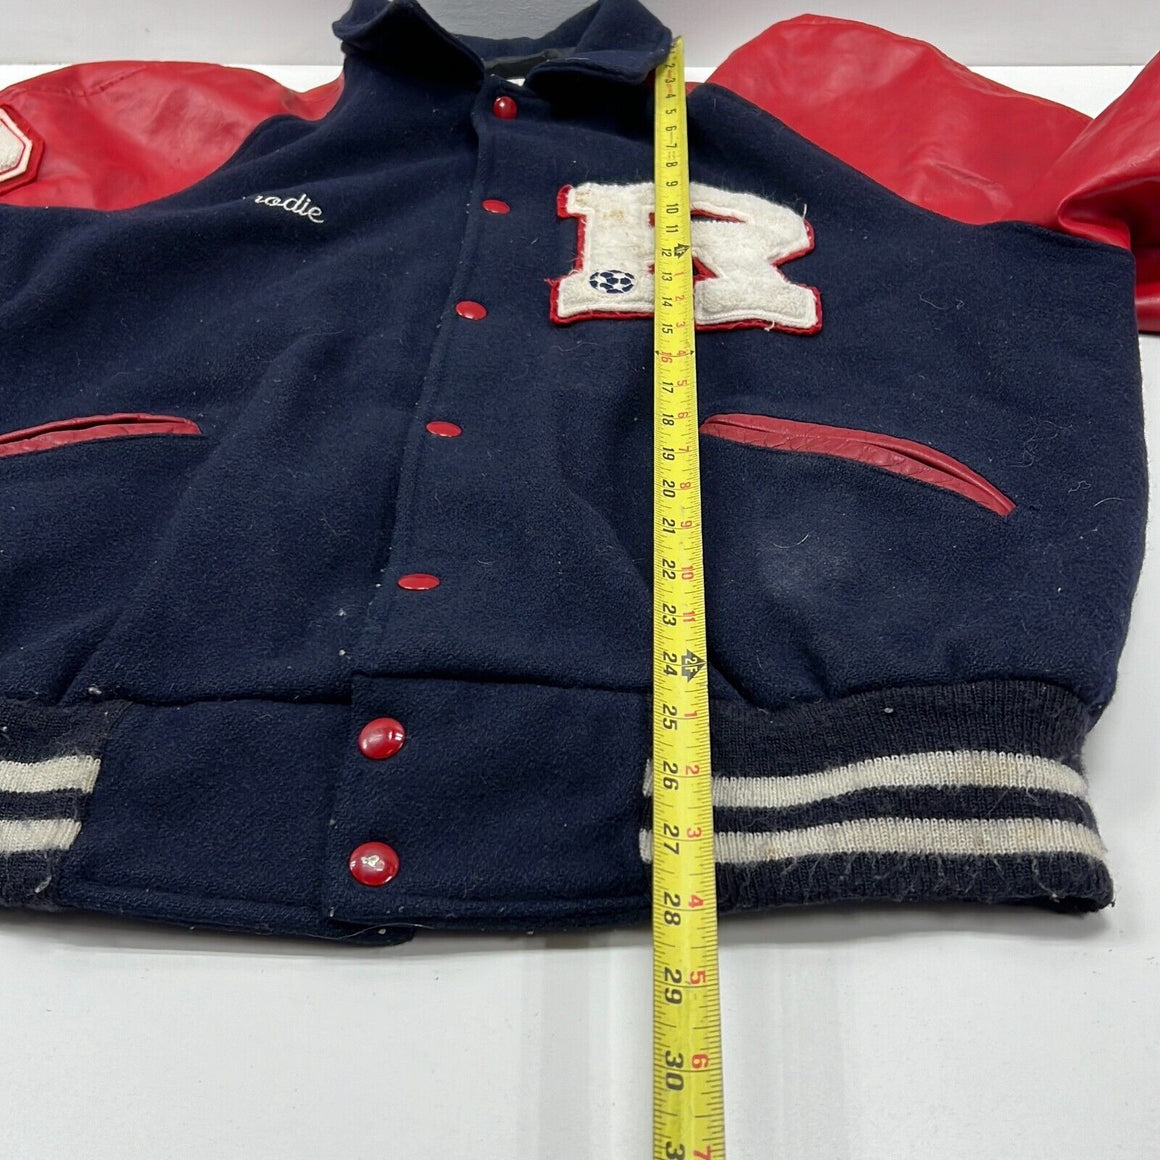 Latest Red Tape Bomber Jackets arrivals - Kids - 2 products | FASHIOLA INDIA